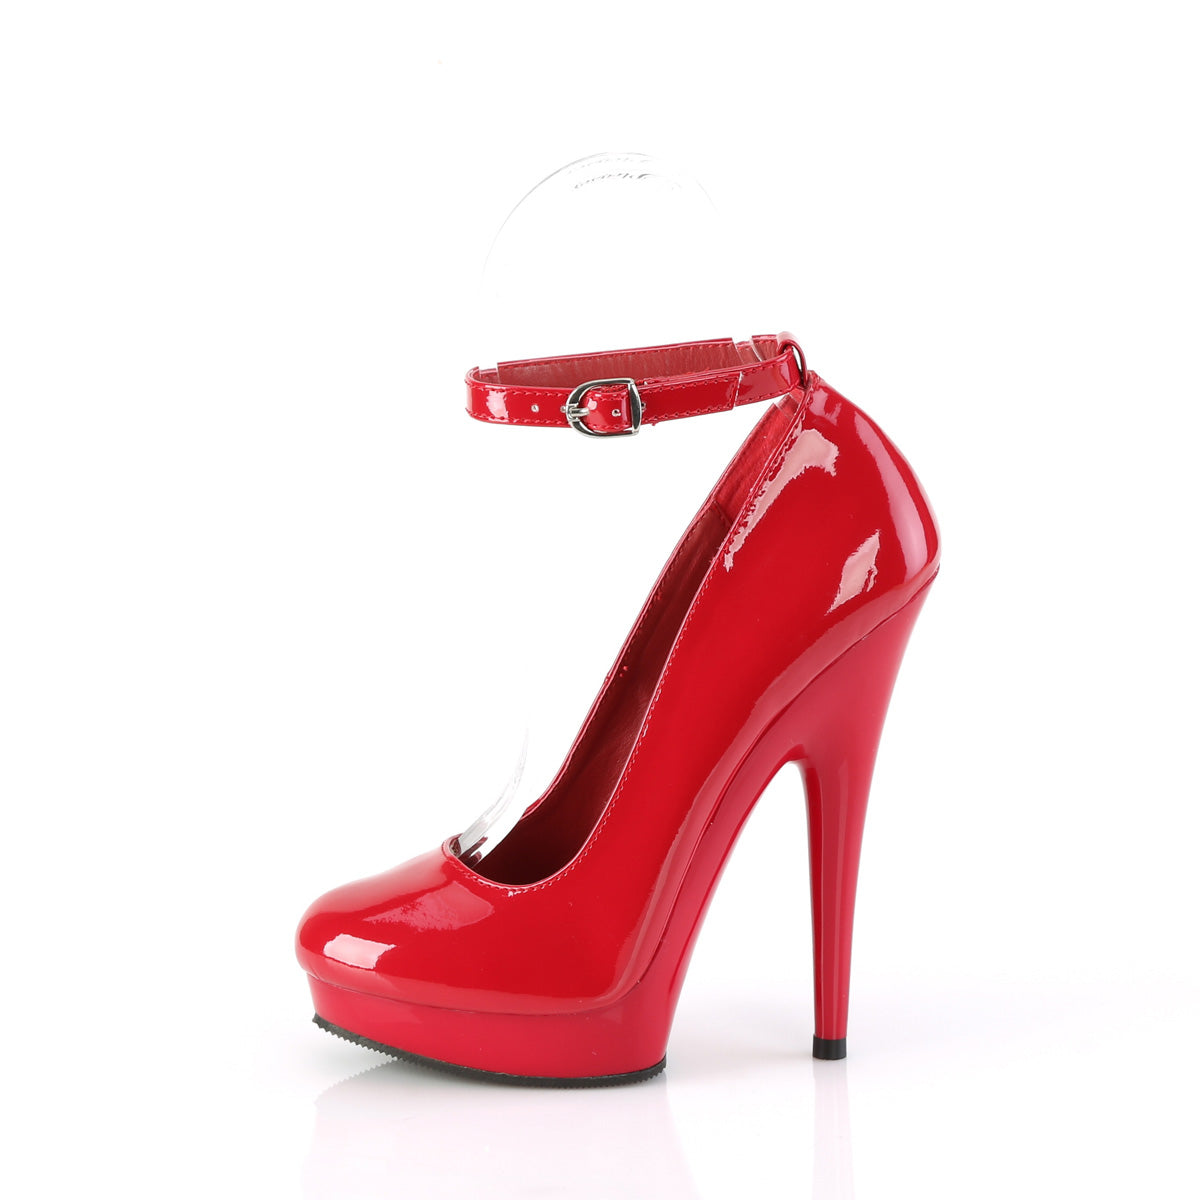 FABULICIOUS SULTRY-686 RED 6 INCH HIGH HEEL SHOES SIZE 8 – Shoes Of ...